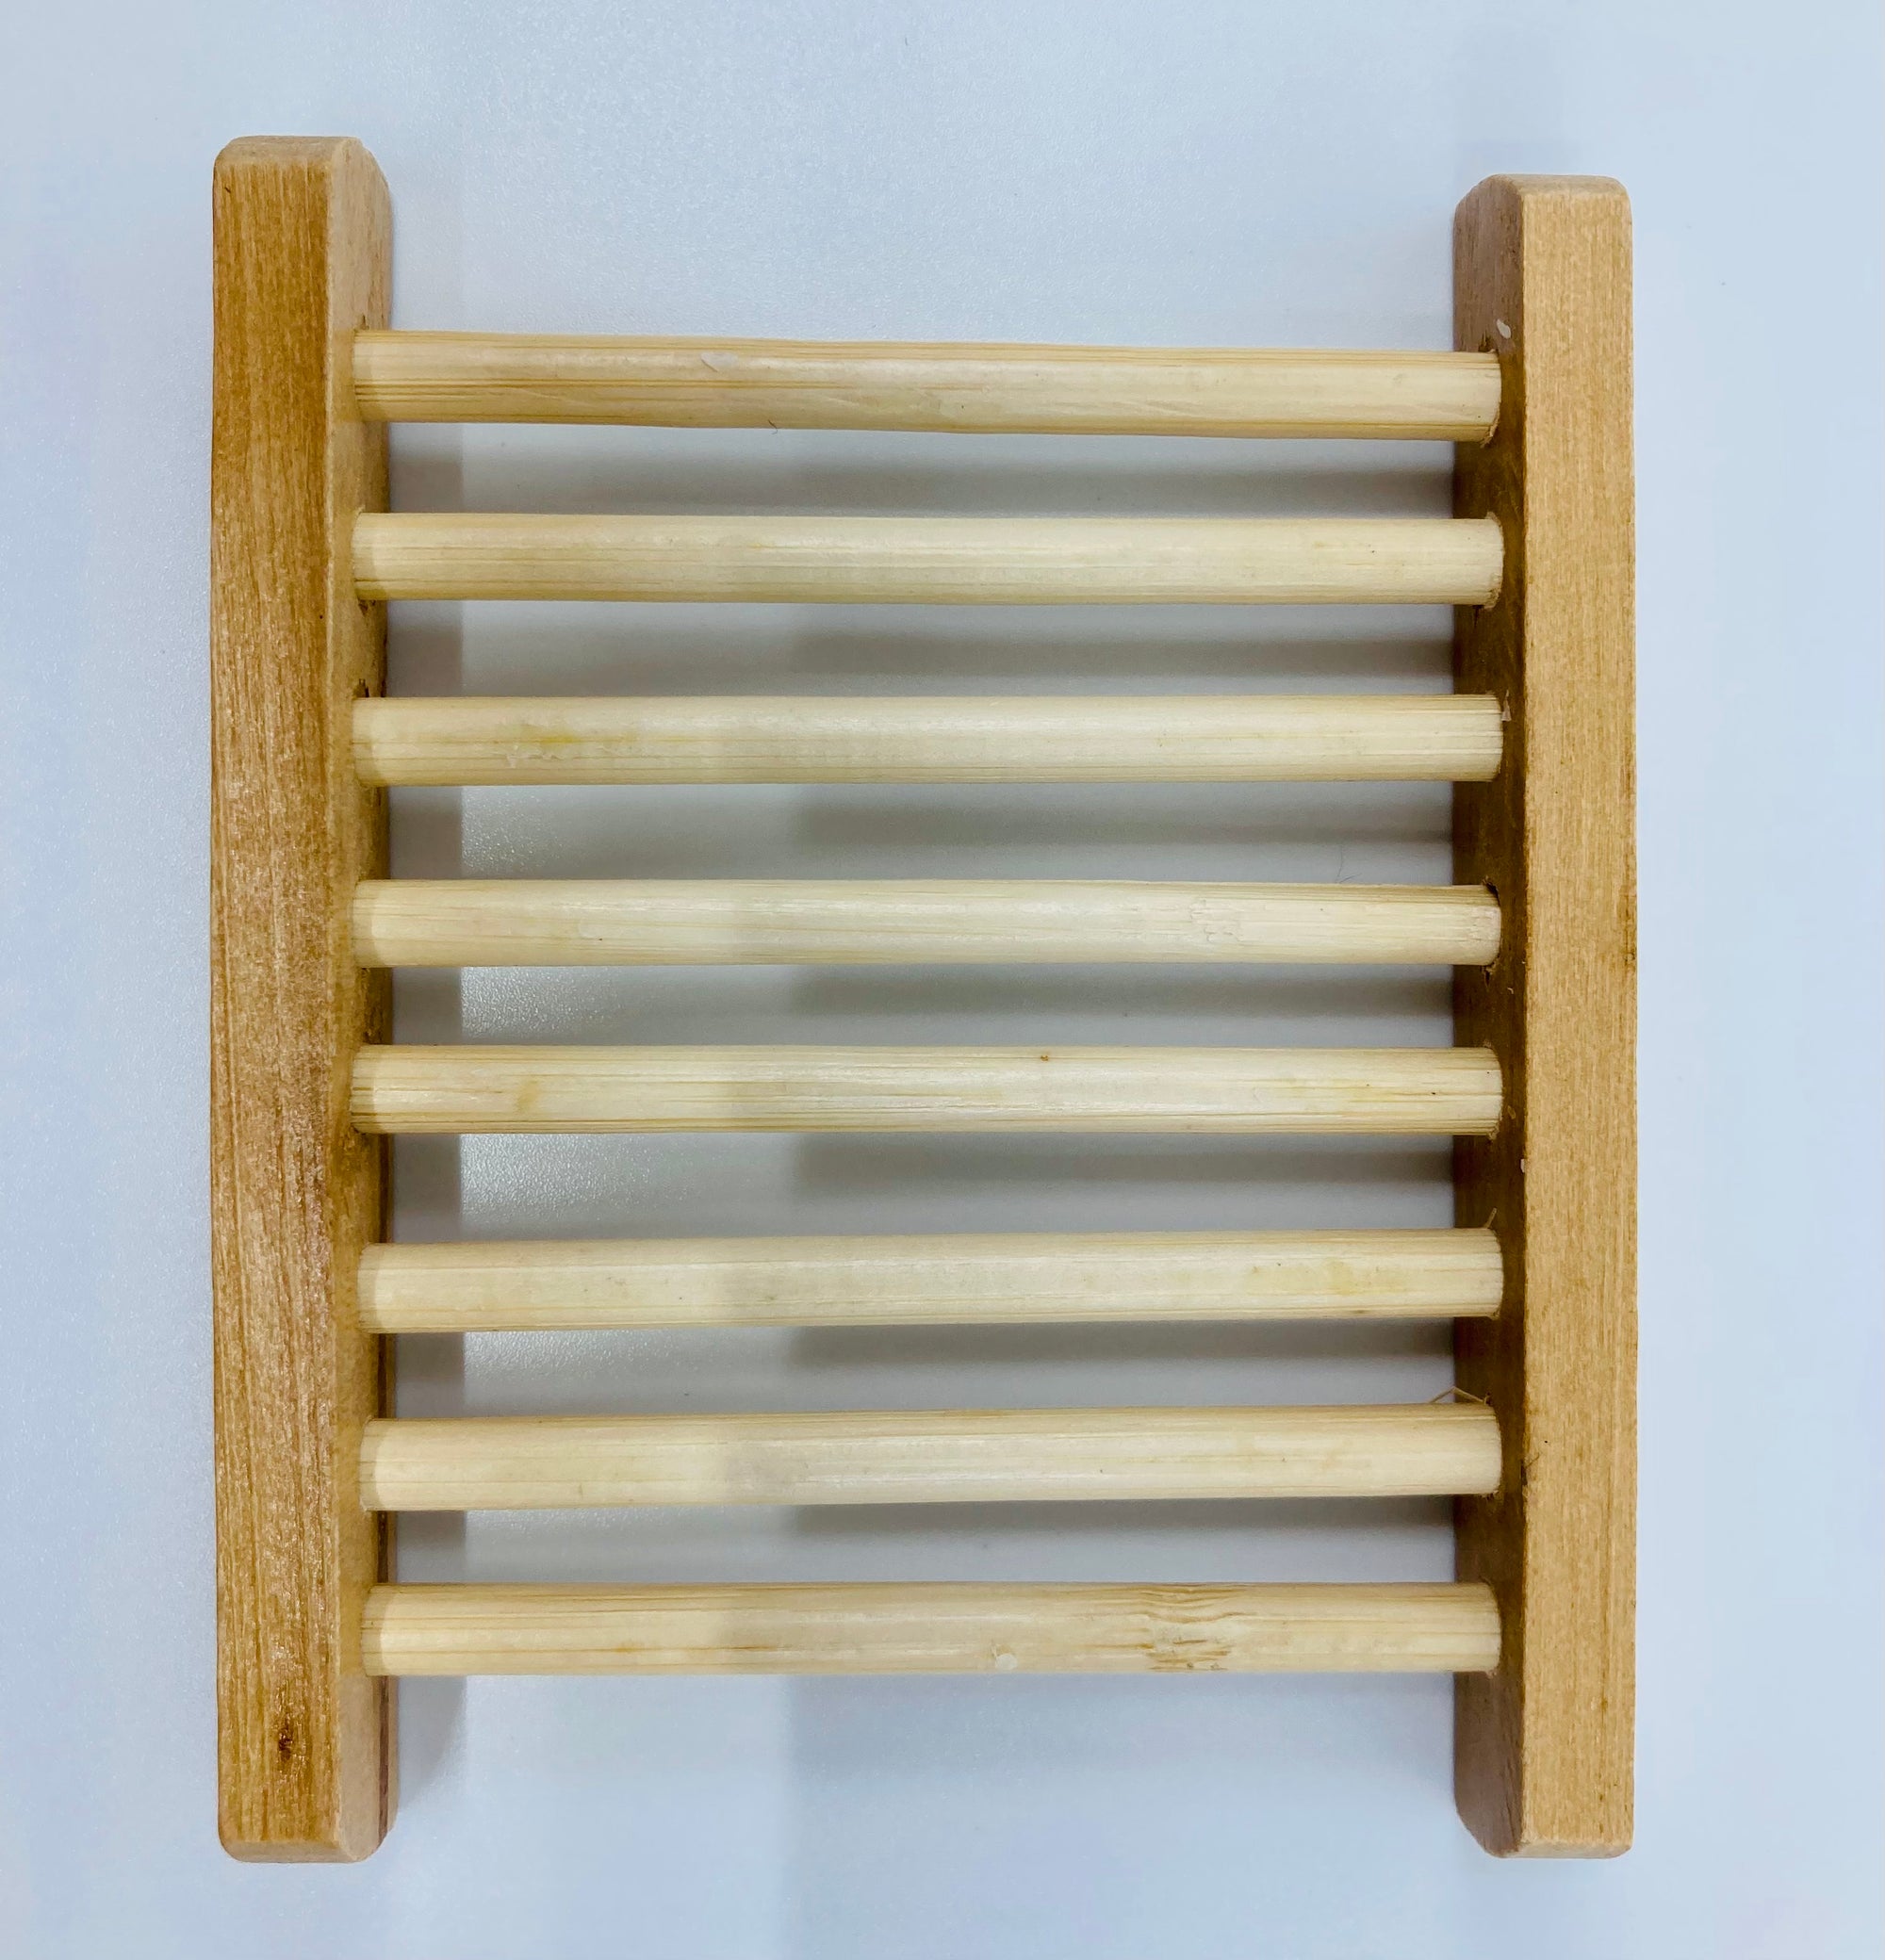 This bamboo soap dish is approximately 4 inches long and 3 inches wide.  It is made from 100% natural bamboo.  Please note that since bamboo is a natural resource, there may be color variations.